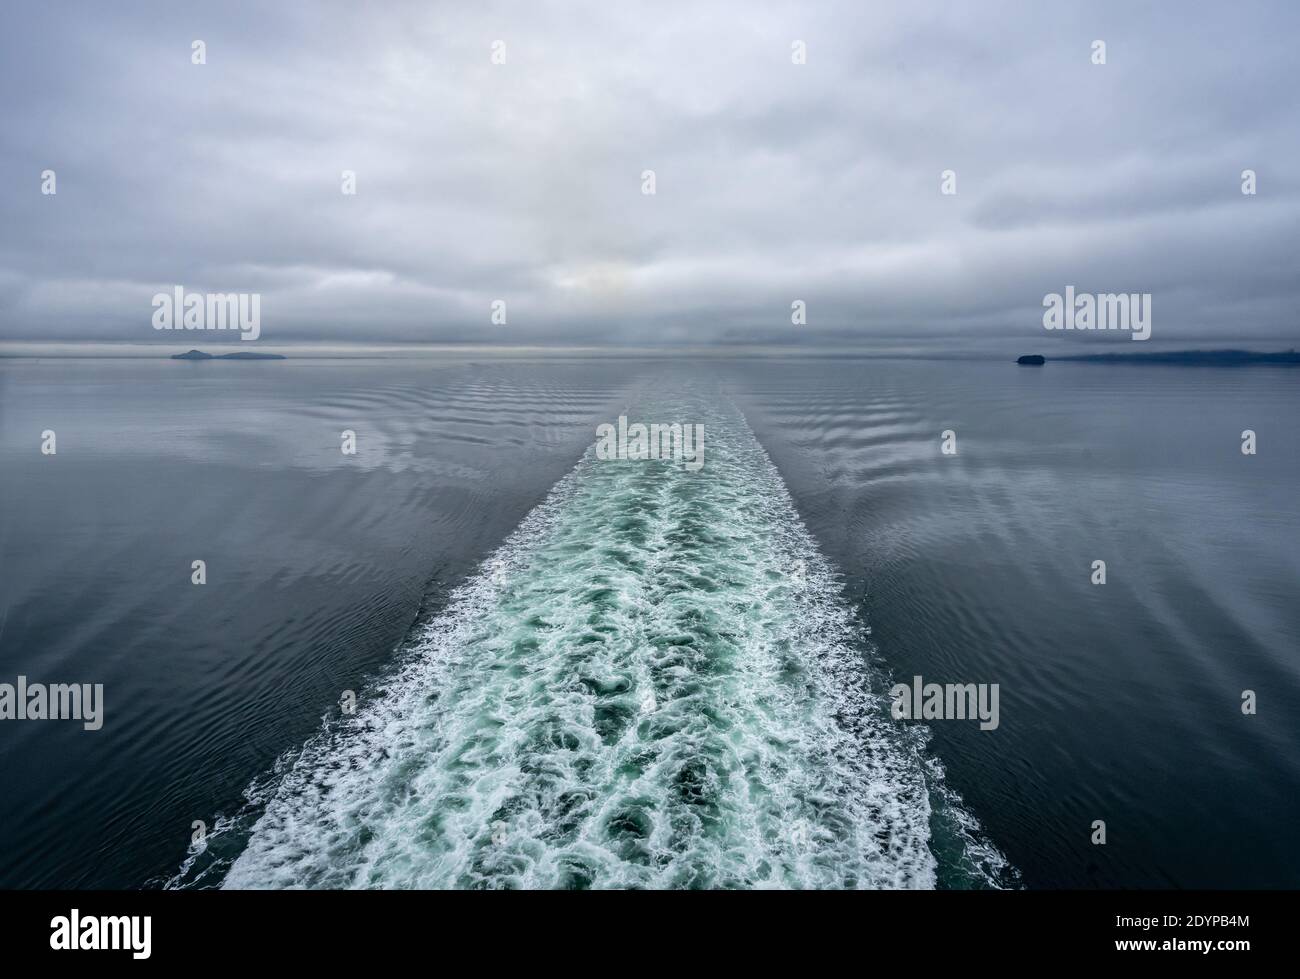 Wake behind a ship in deep water channel Stock Photo